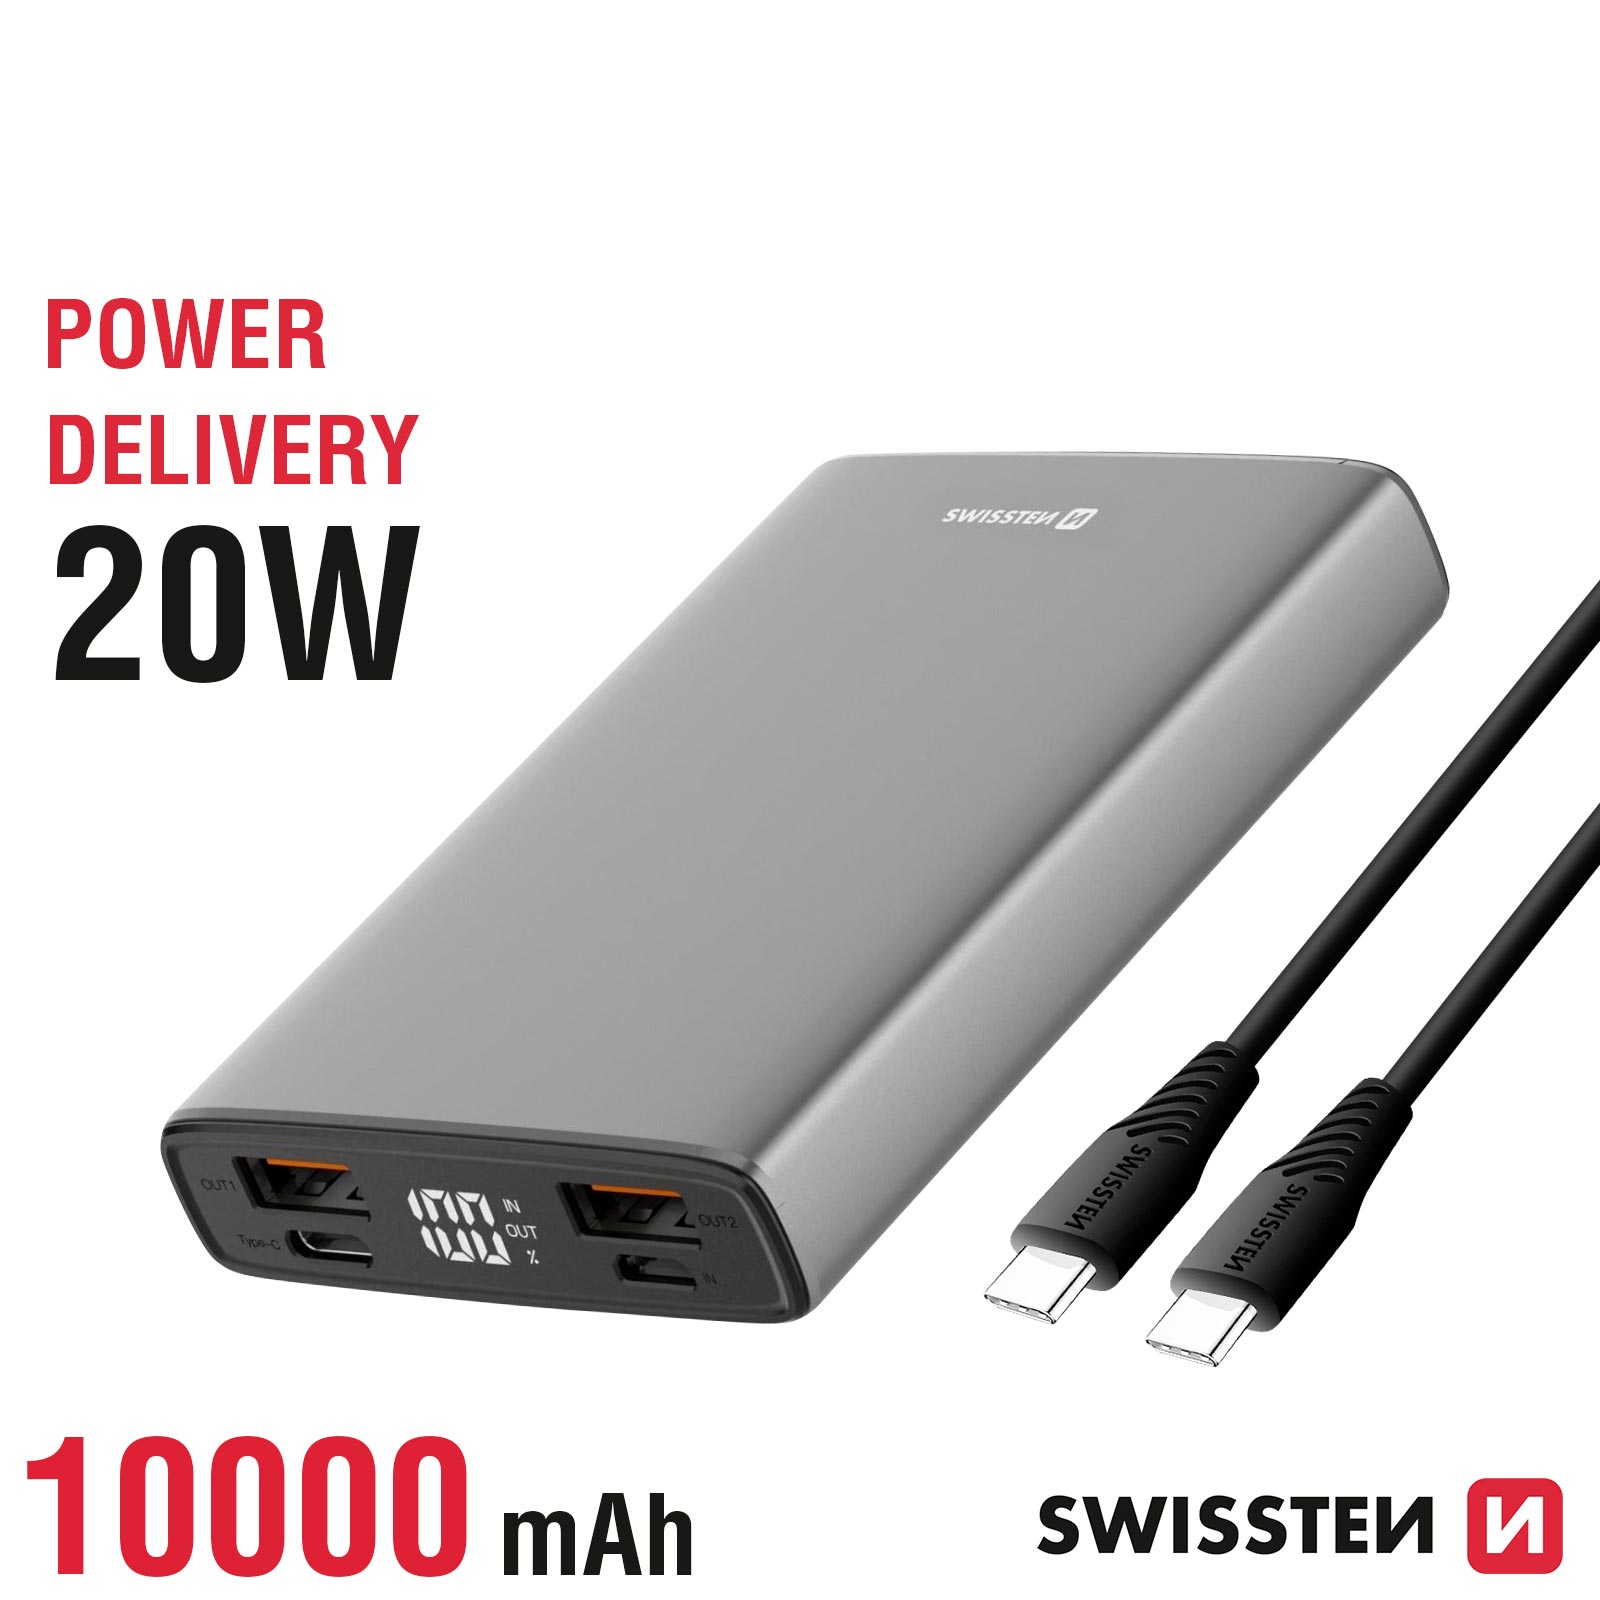 Powerbank 20W Power Delivery 10000mAh, USB-C e USB Quick Charge